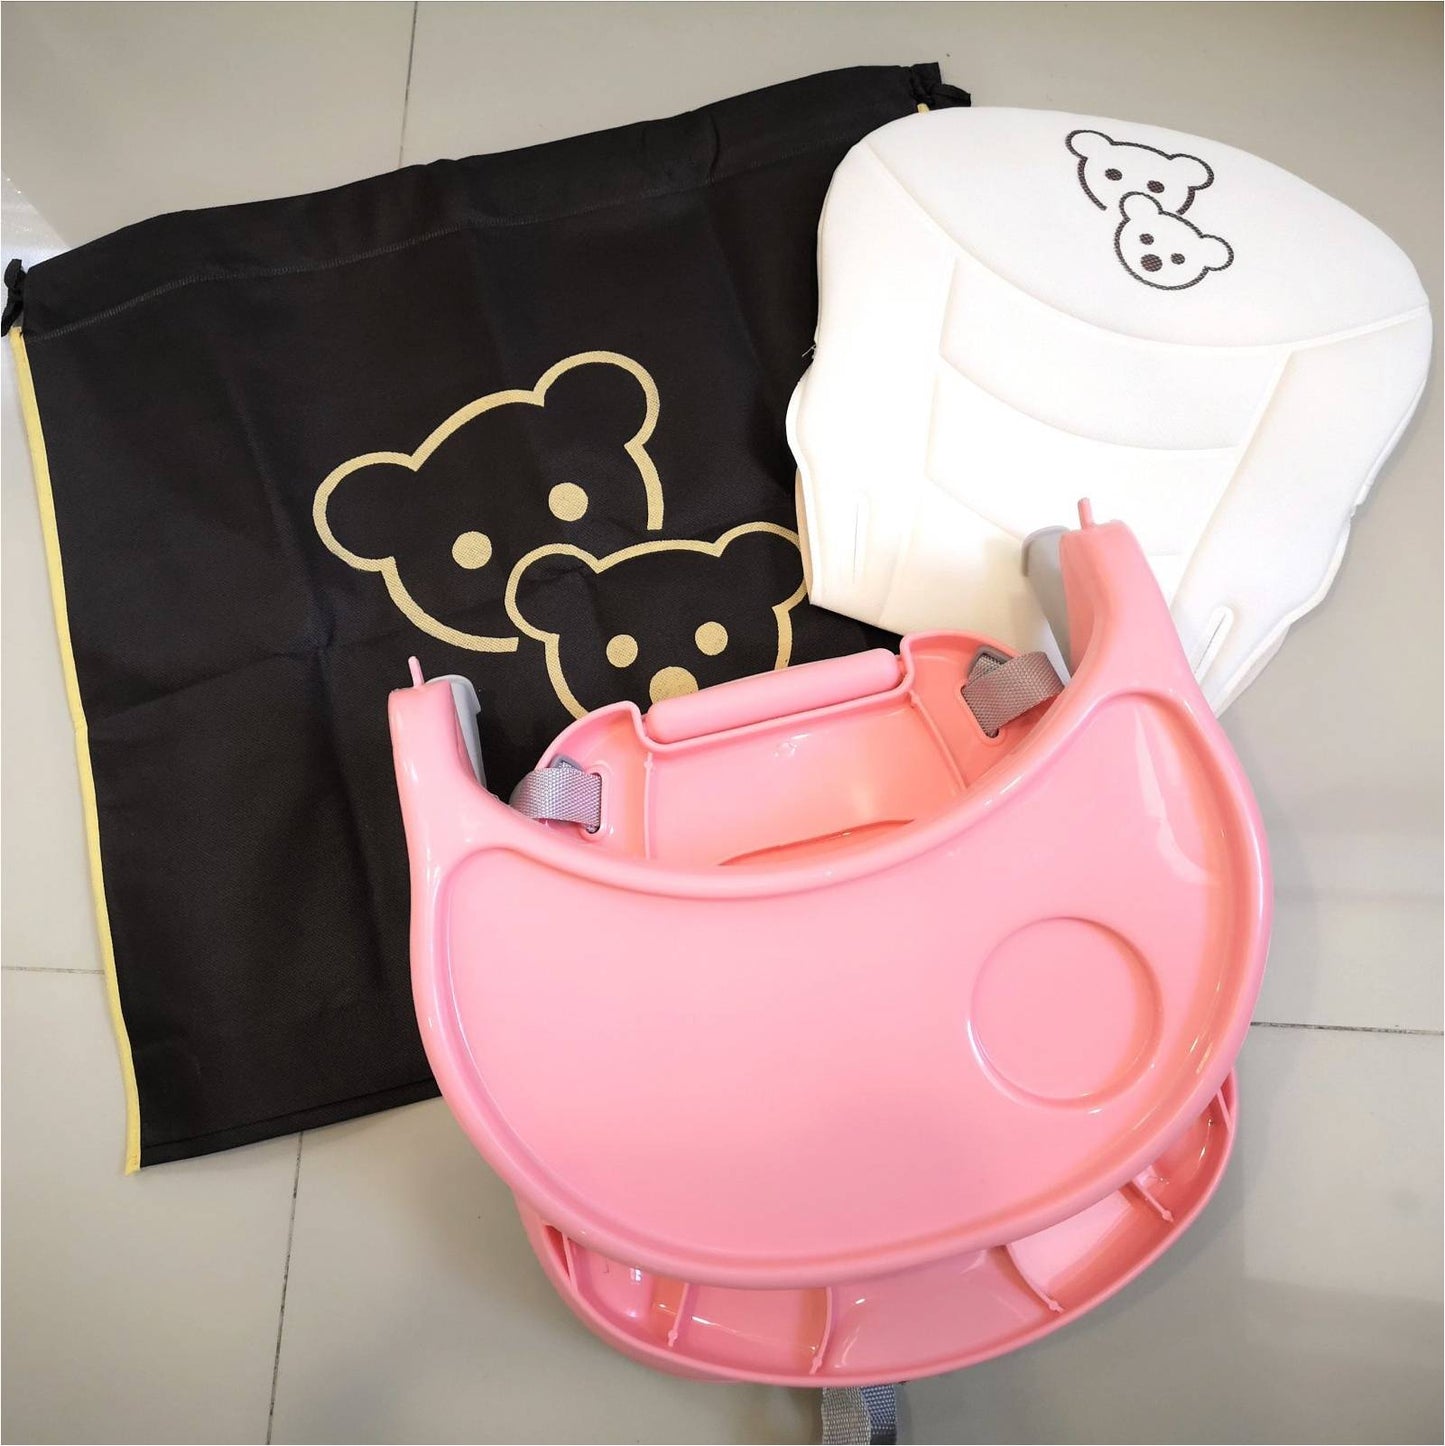 Owl Baby High Chair Converter and Travel Booster Seat with Tray